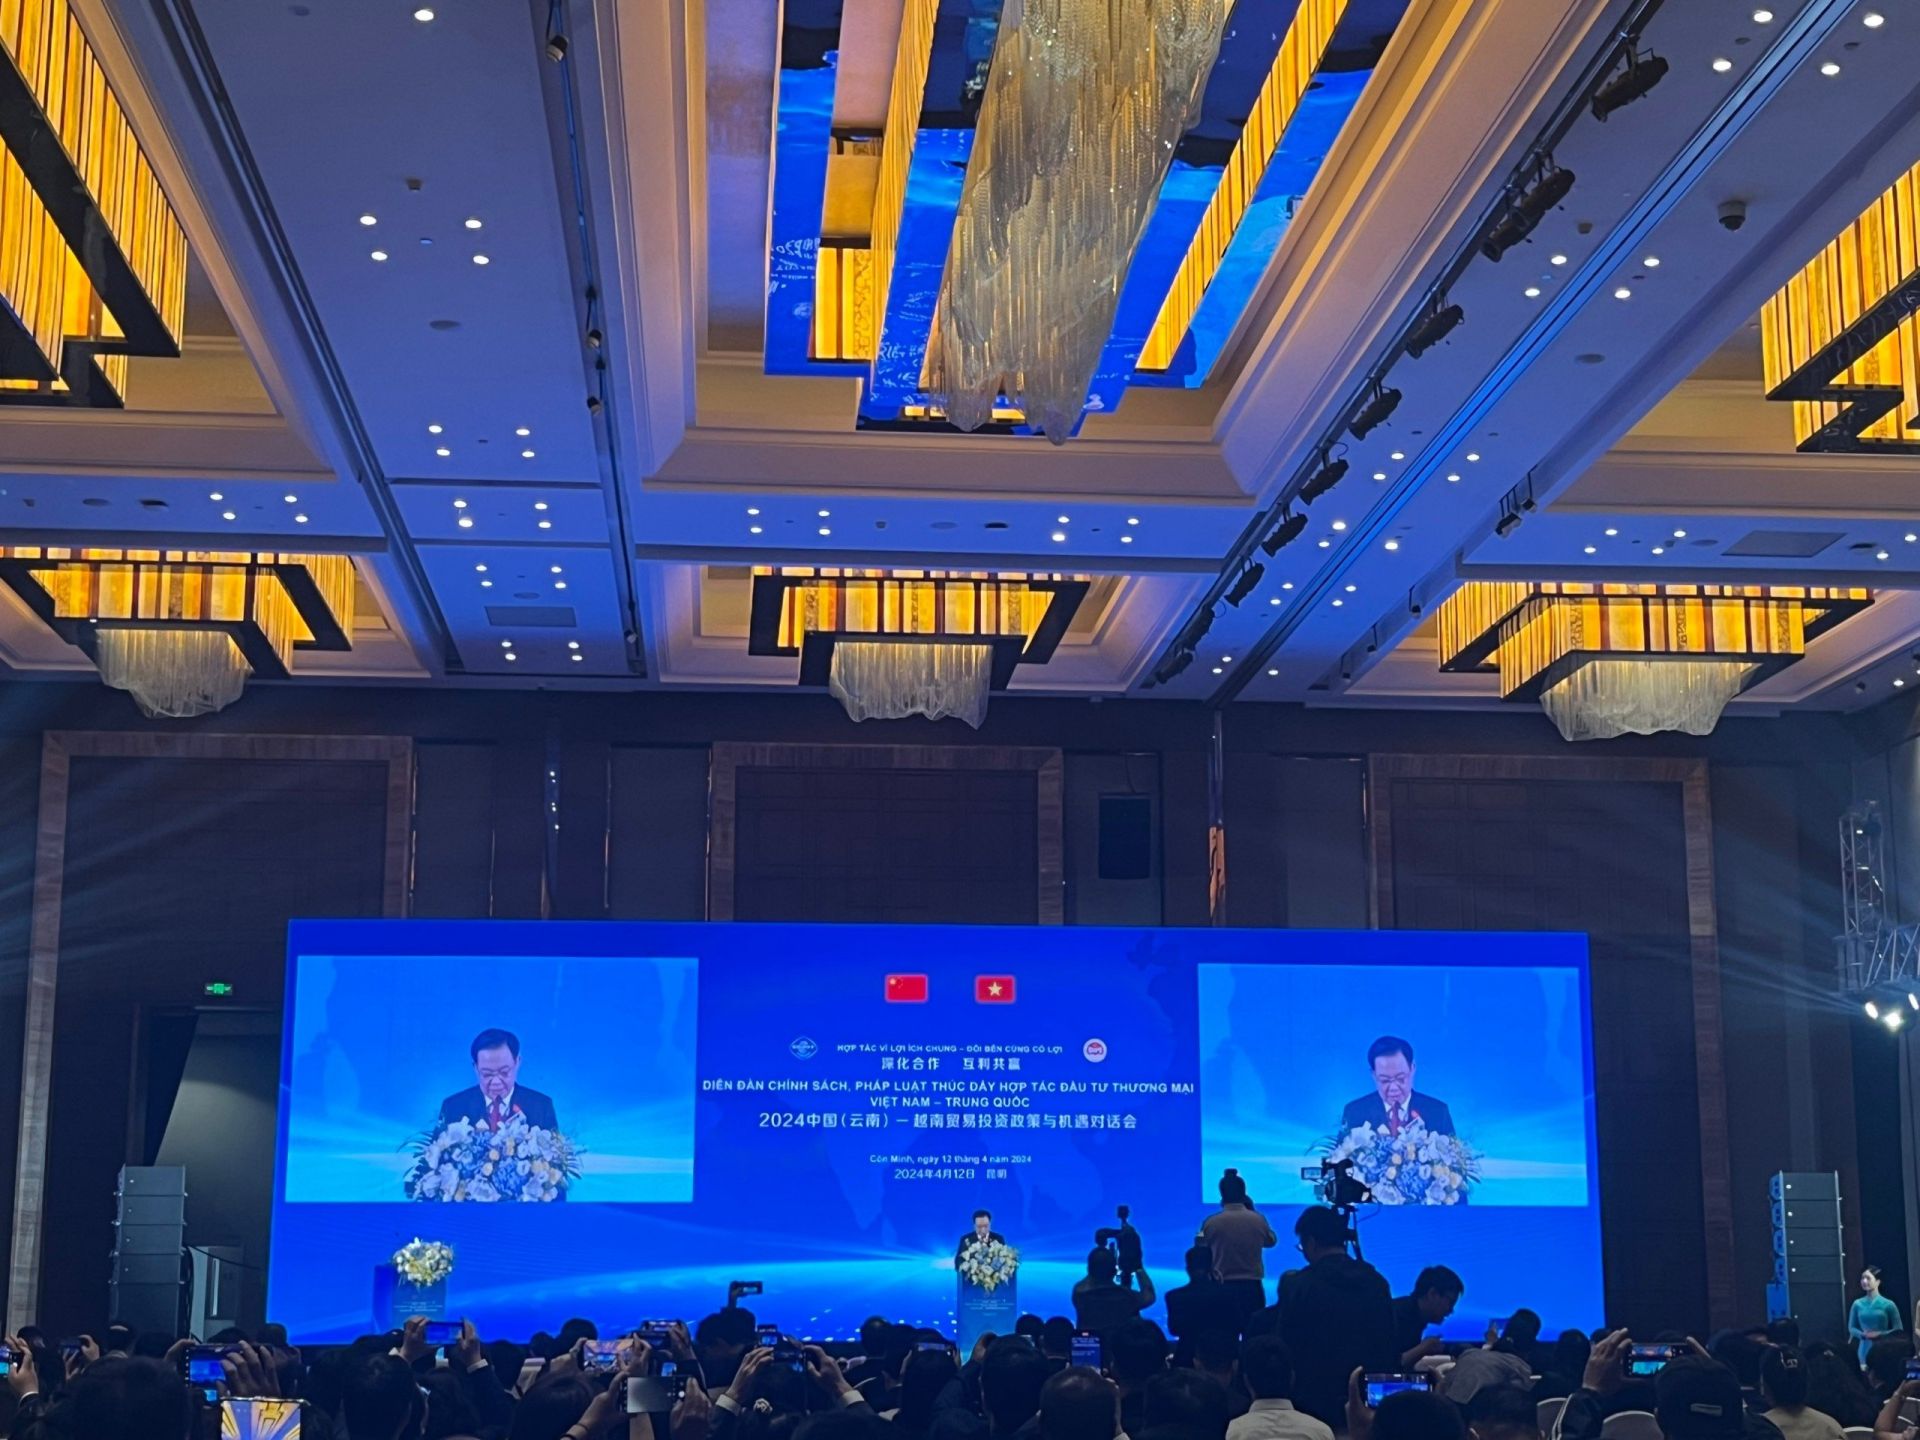 National Assembly Chairman Vuong Dinh Hue delivers a speech at the “Policy and Legal Forum to Promote Investment and Trade Cooperation between Vietnam and China” held in Yunnan Province, China